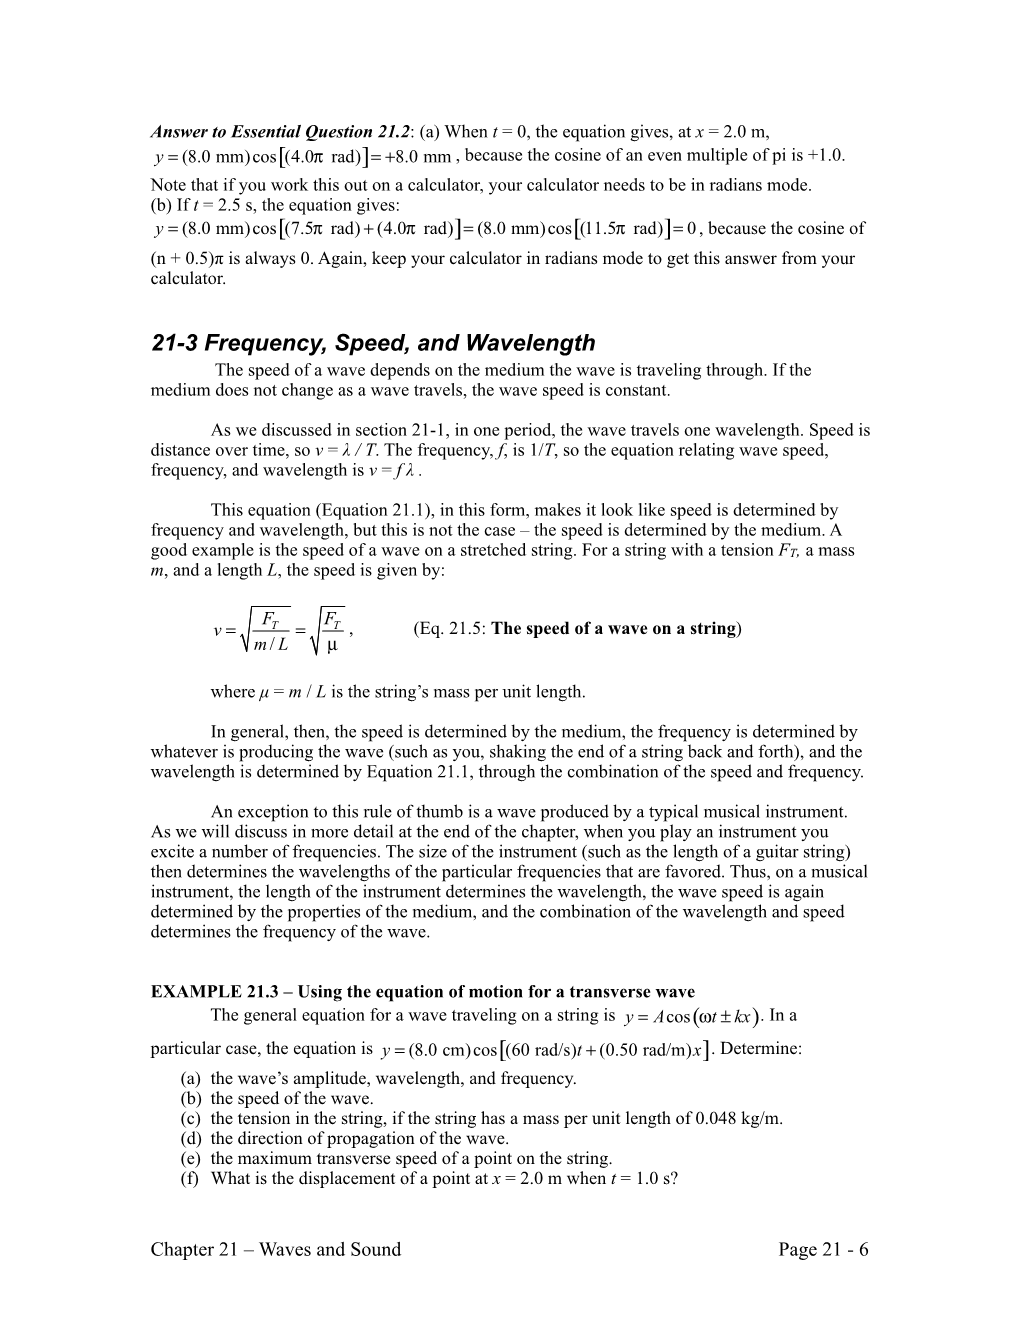 Section 21-3: Frequency, Speed, and Wavelength